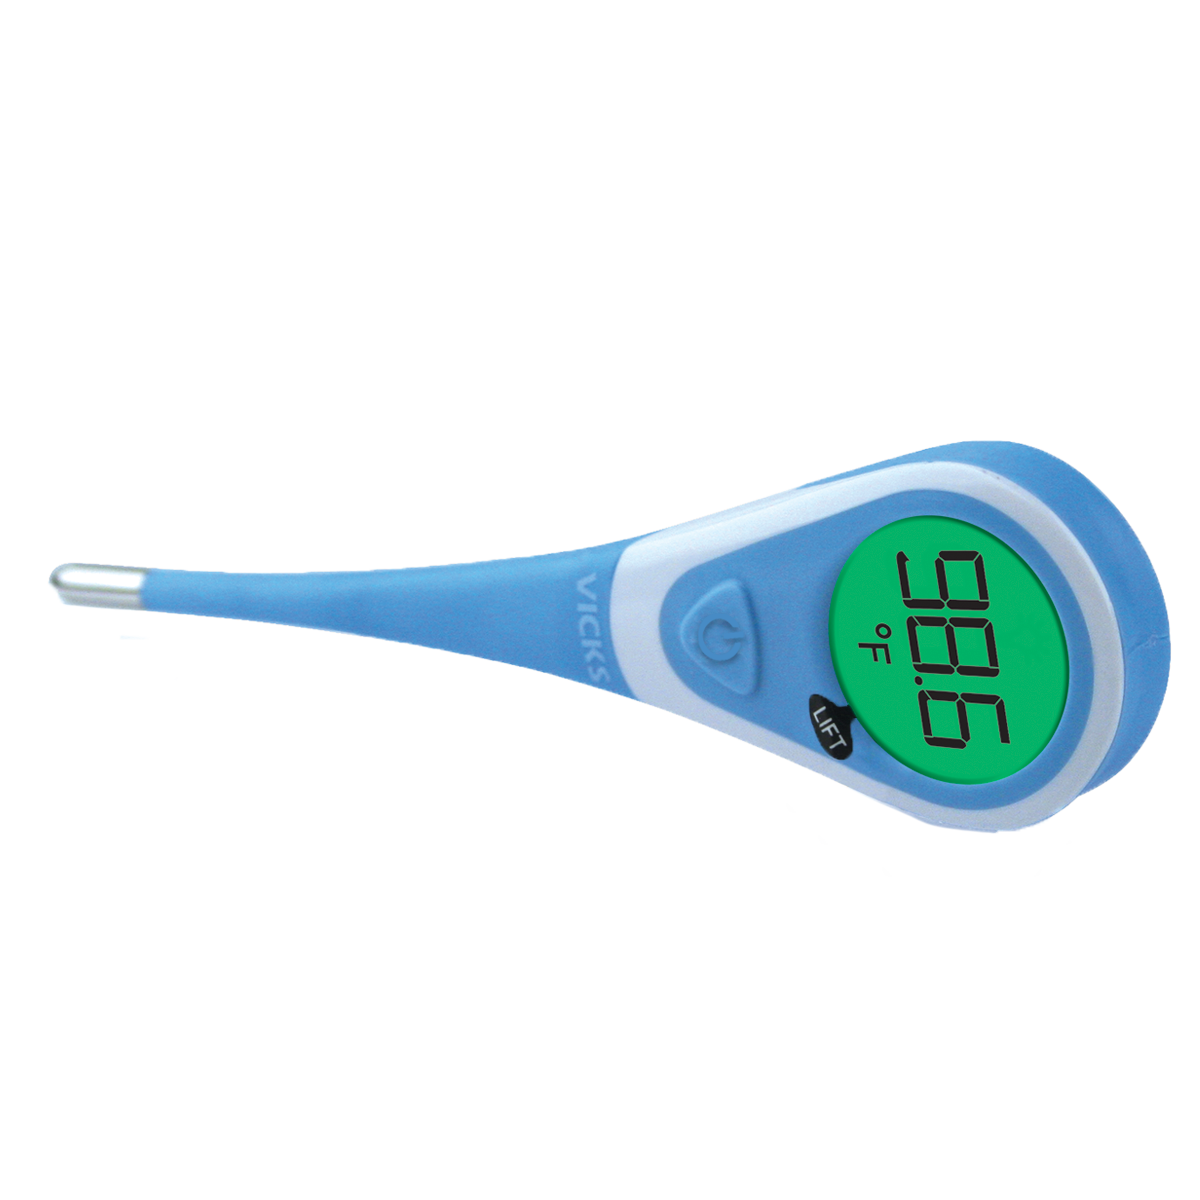 Choosing The Best Thermometer for Seniors